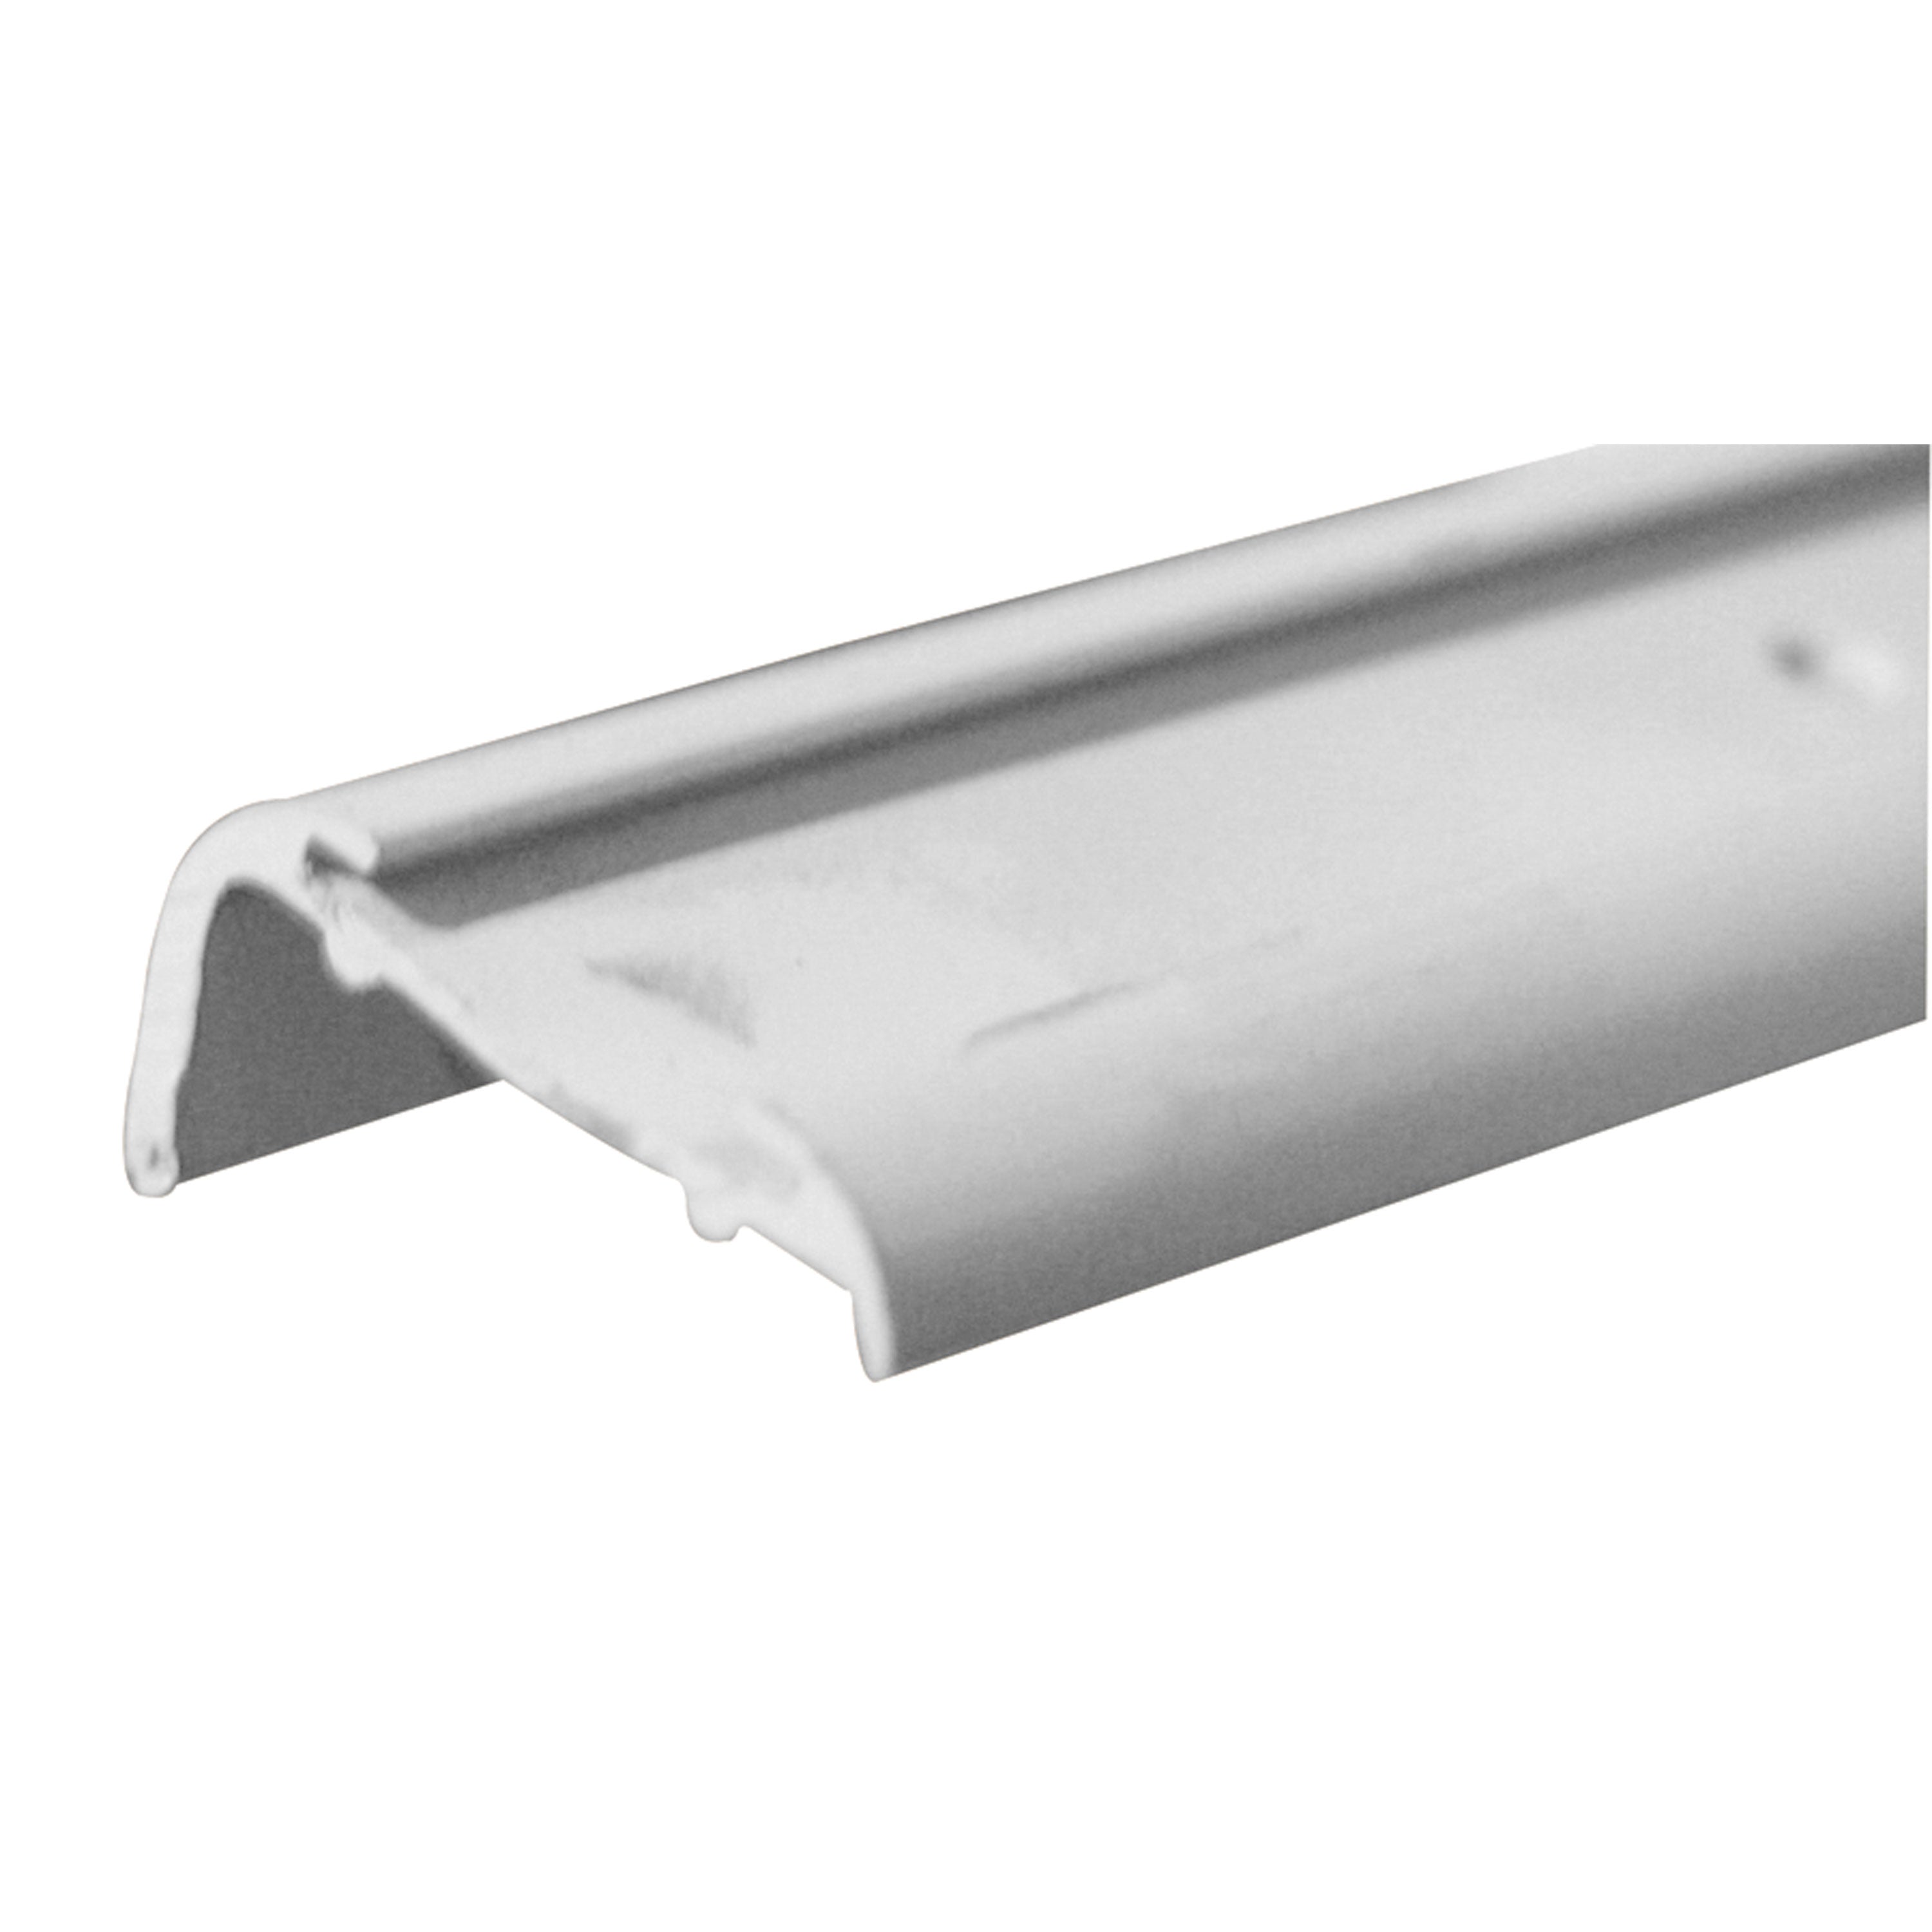 AP Products 021-57401-8 Insert Roof Edge - 8 ft. (5 Pack), Polar White